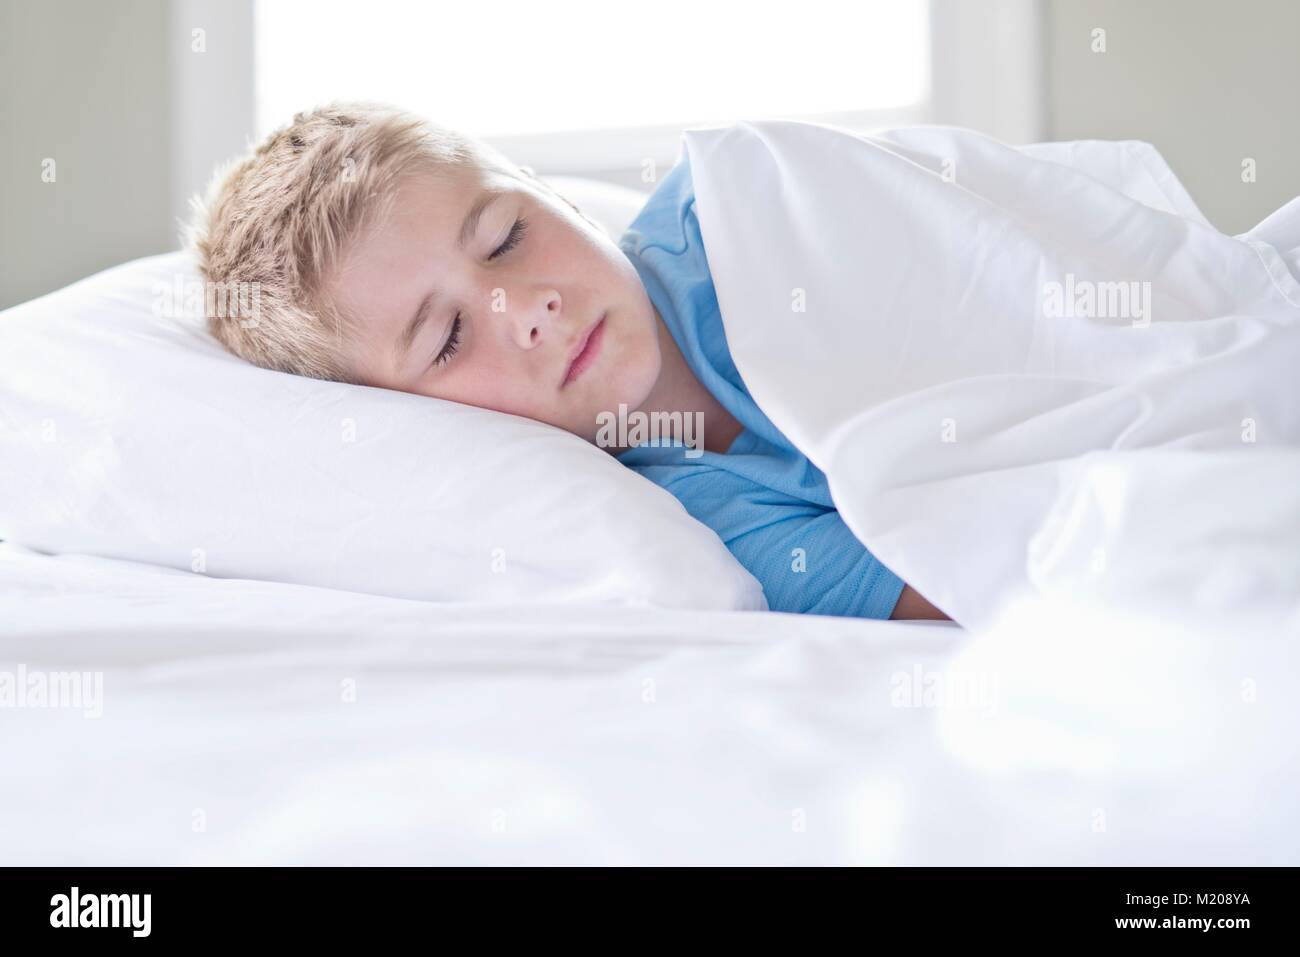 Young boy asleep with head on pillow. Stock Photo